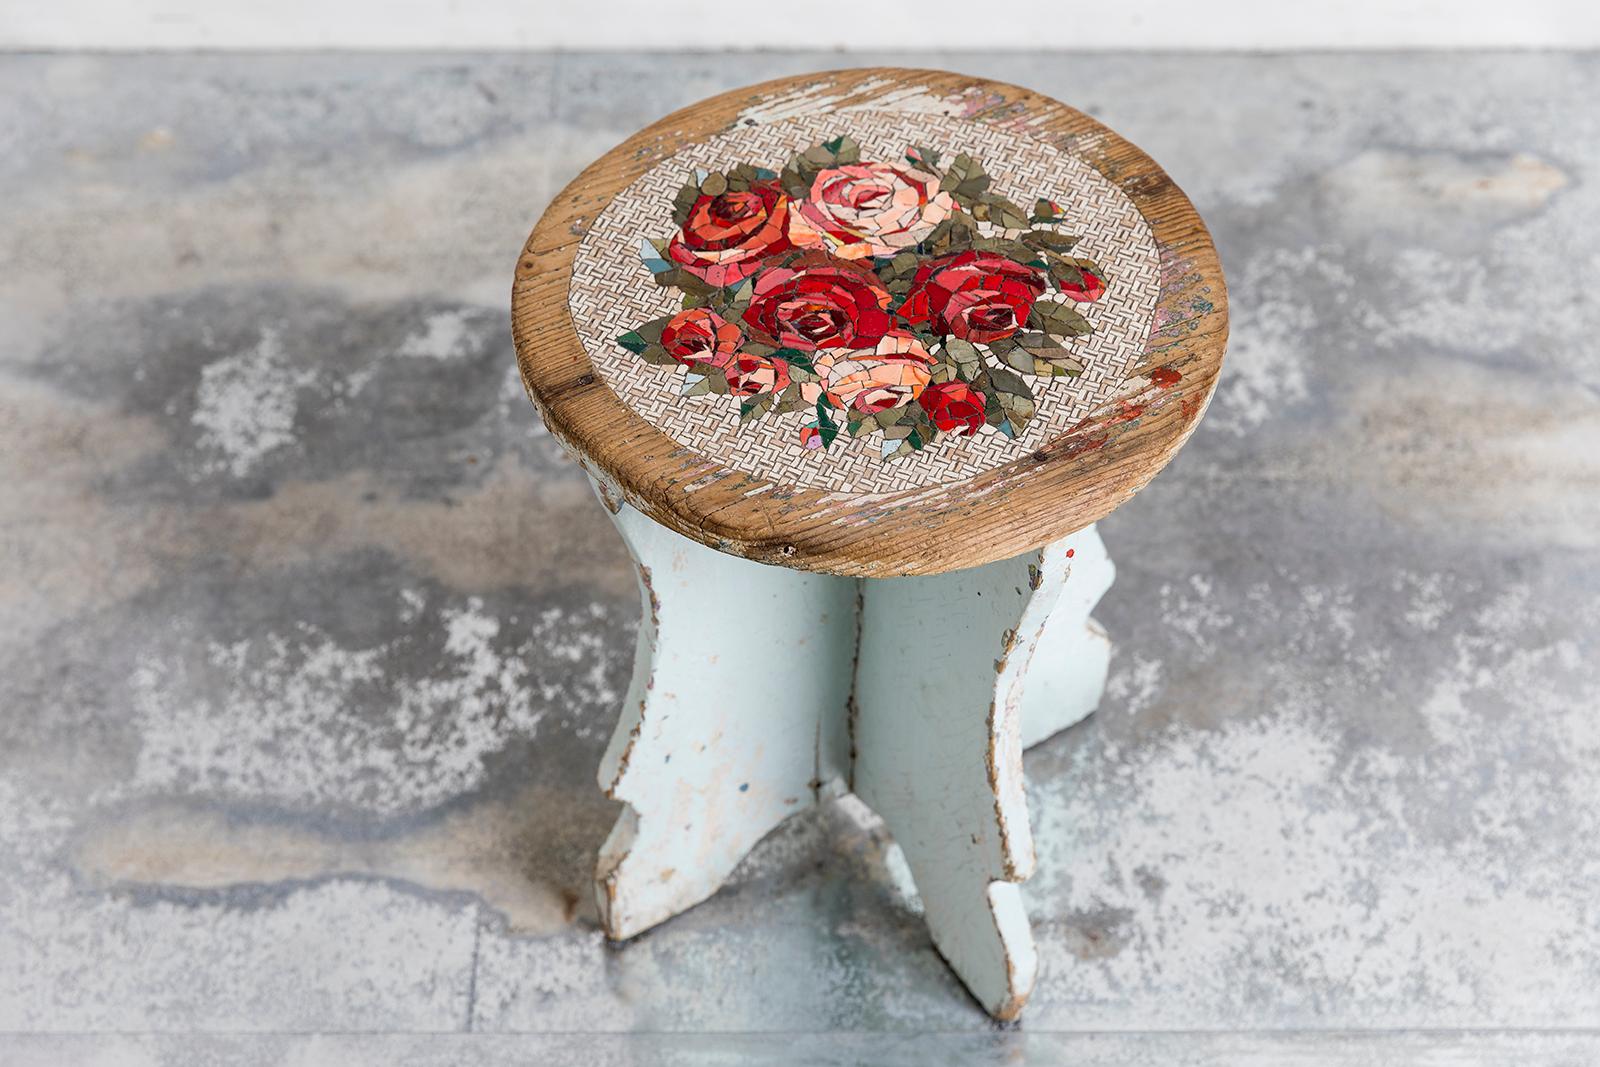 Sgabello Rose Antique wood stool by Yukiko Nagai.
Dimensions: D36 x W37 x H47 cm.
Material: Wood, Marble, Natural stone, Venetian color glass, Cement, Stucco
Weight: 4.5 kg 
All pieces are handmade, so the colours and shapes of the patterns may